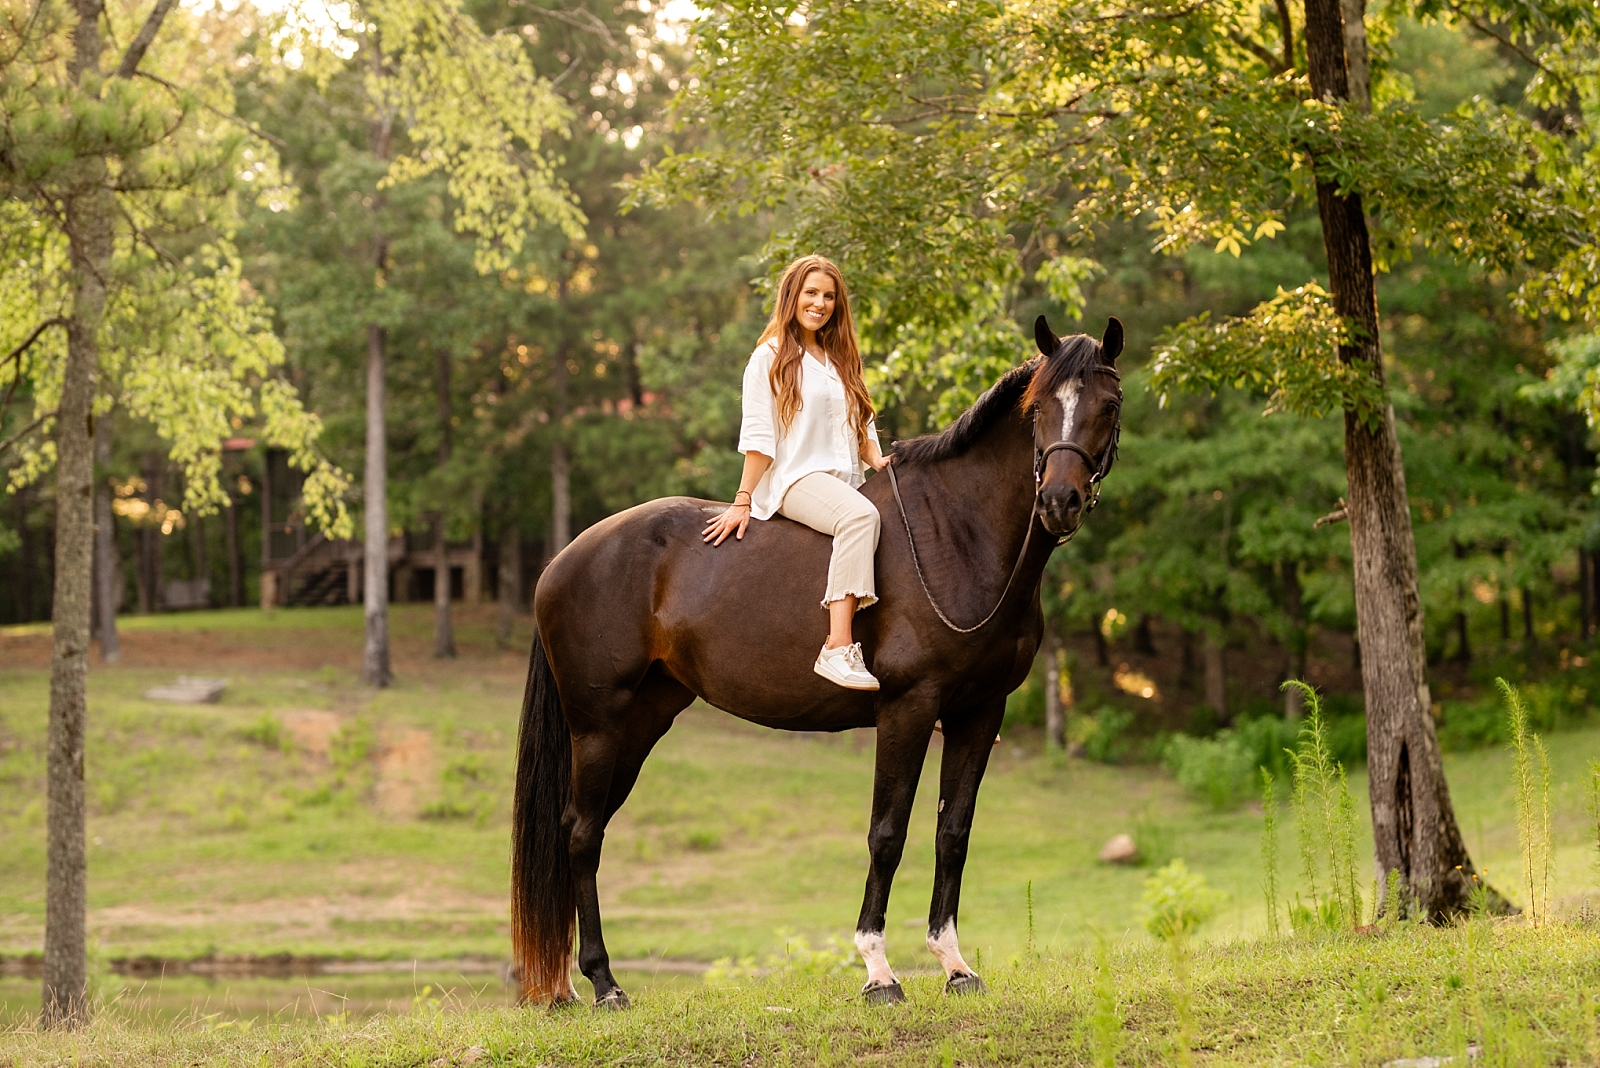 Horse and rider photos taken in Birmingham Alabama by professional equine photographer in Alabama.